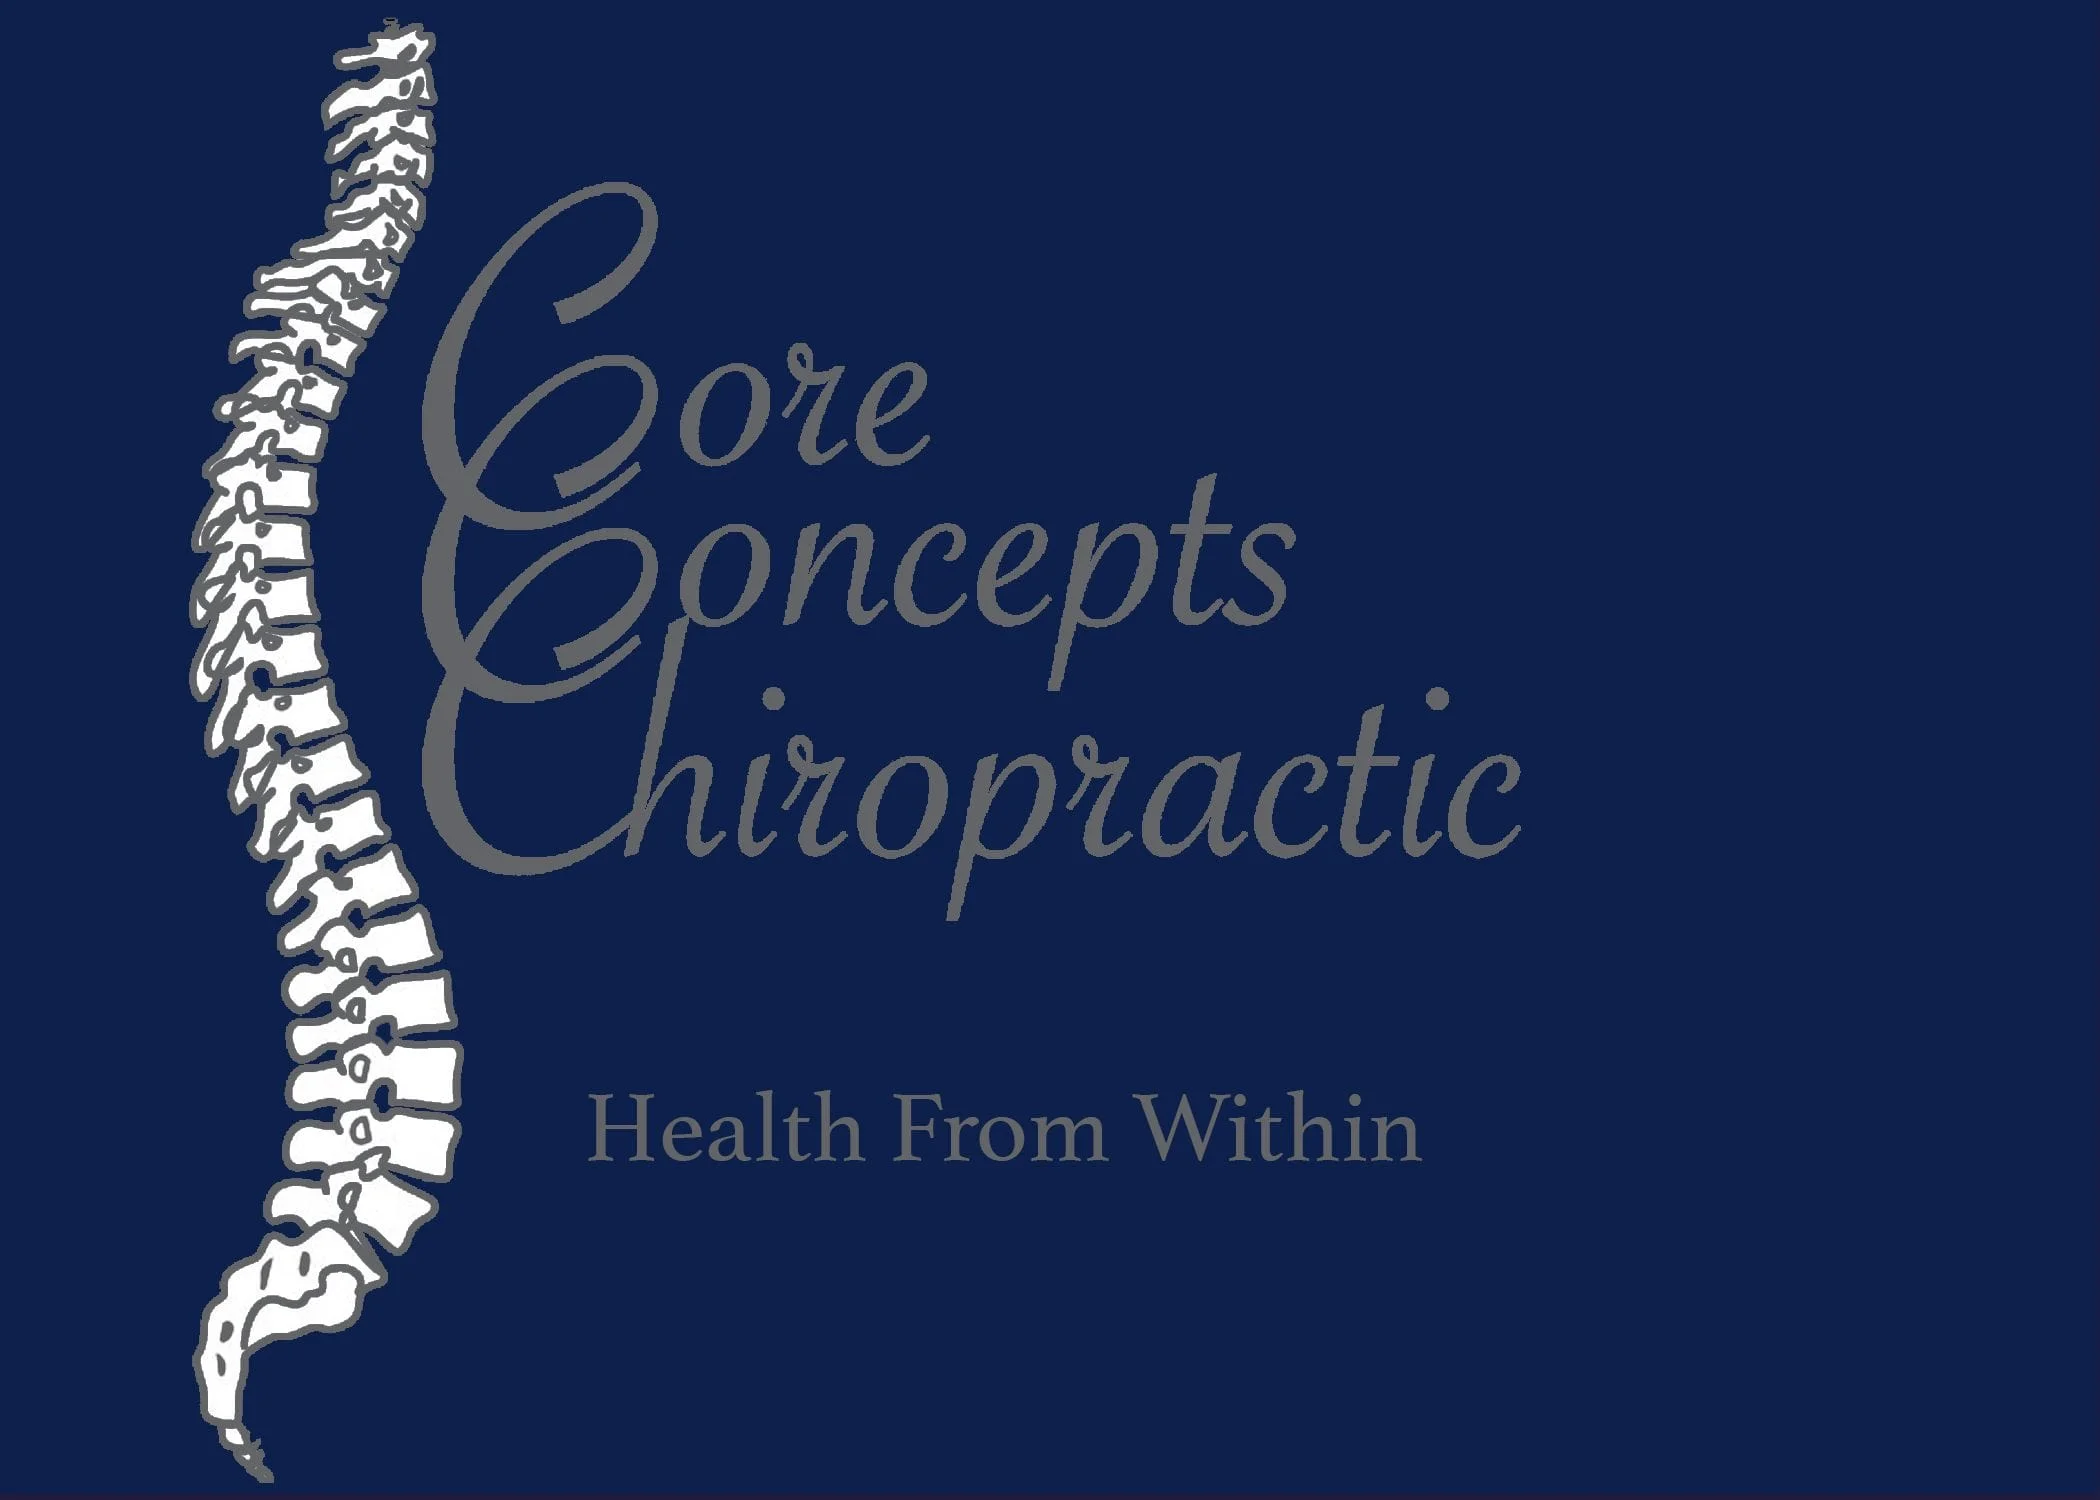 Core Concepts Chiropractic